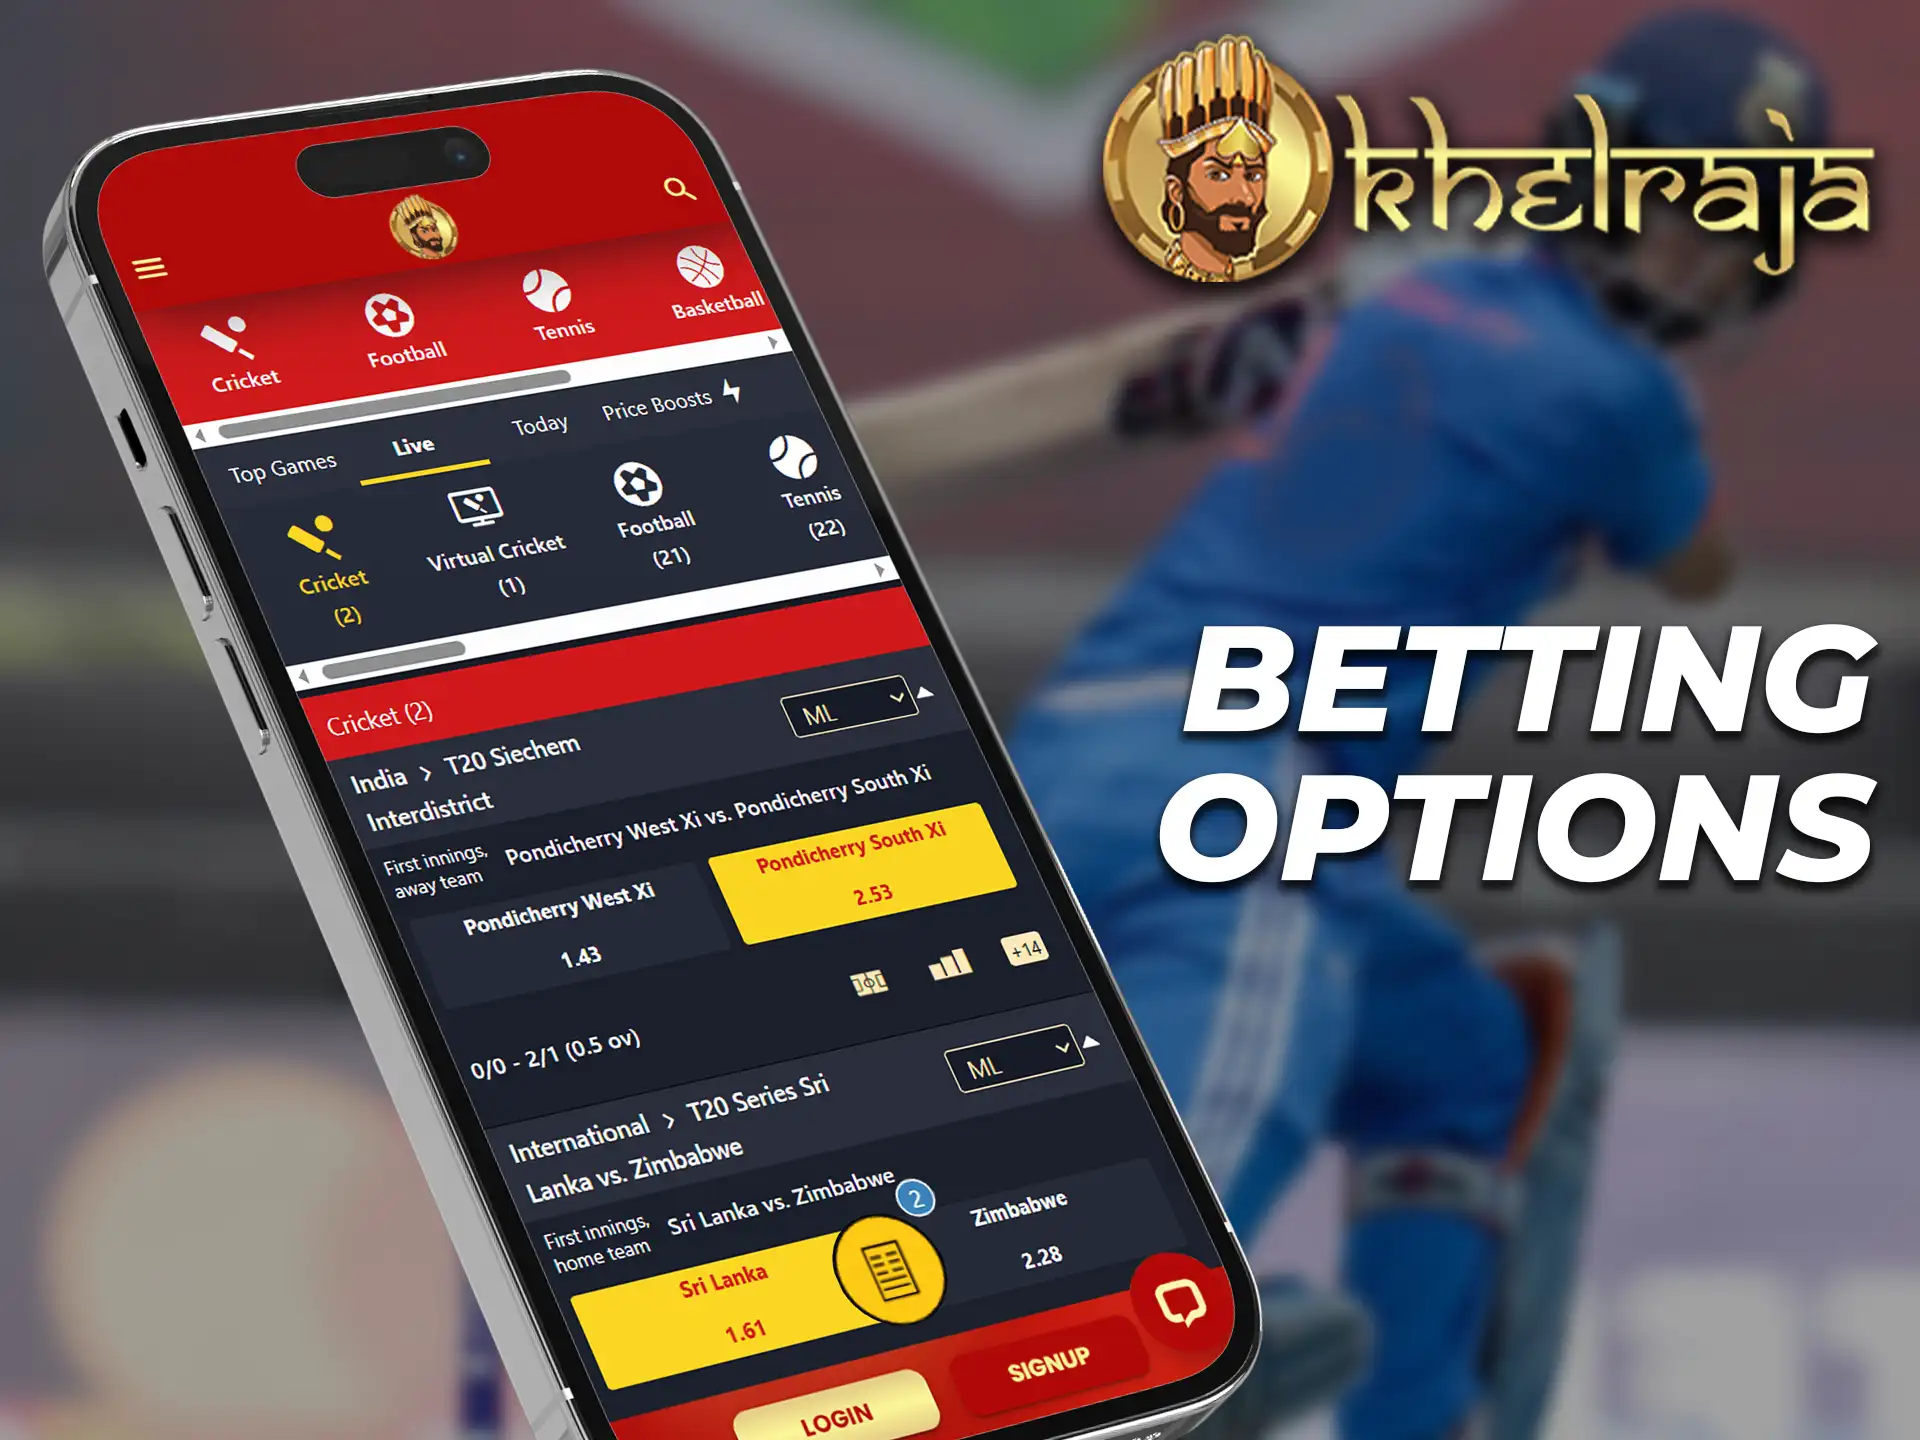 The main betting options in the Khelraja app.